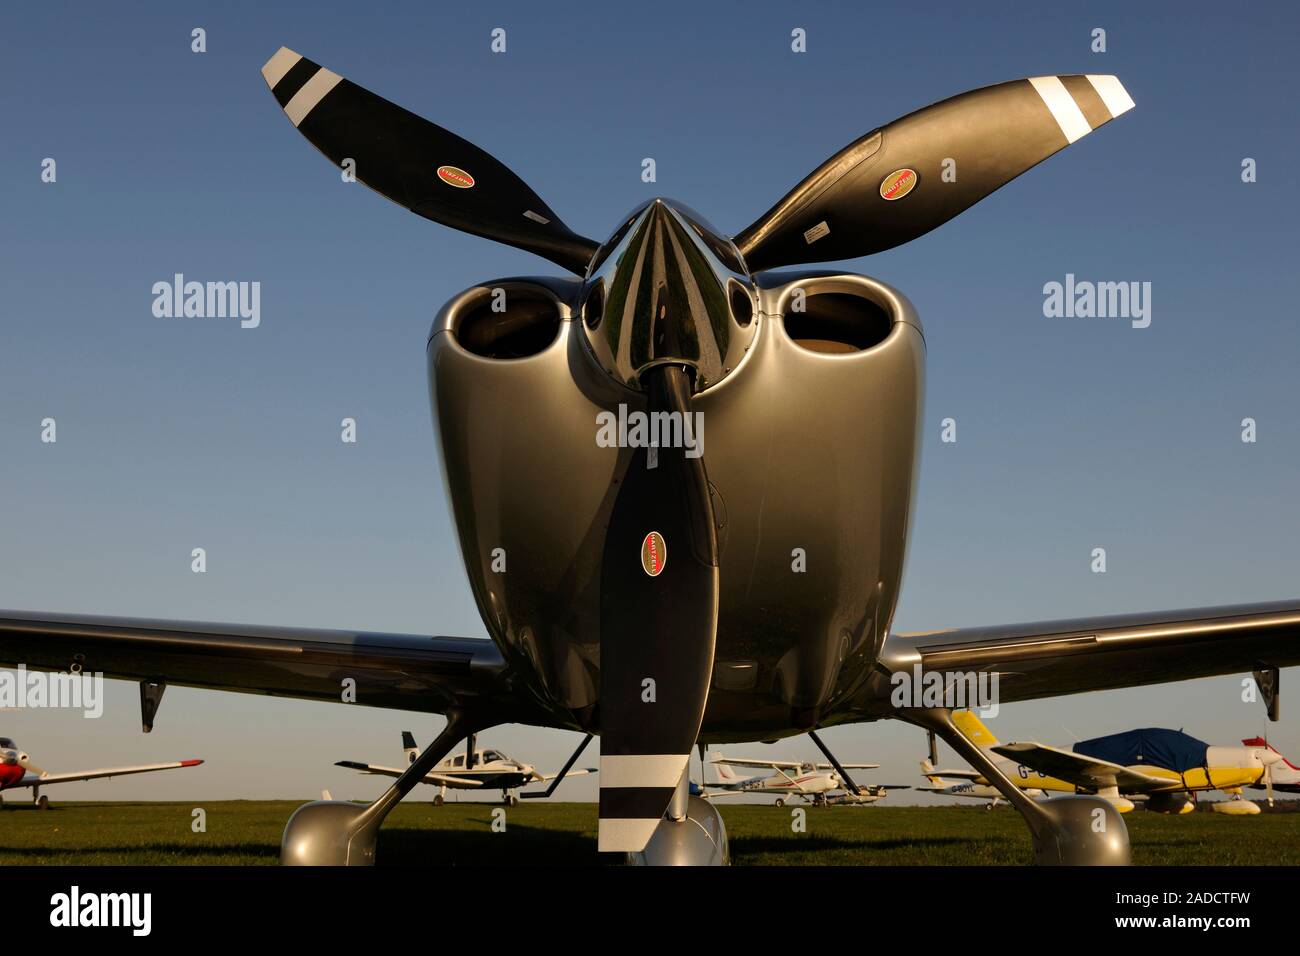 Propeller Of Cirrus Sr With Piper Pa Cherokees And Cessna S